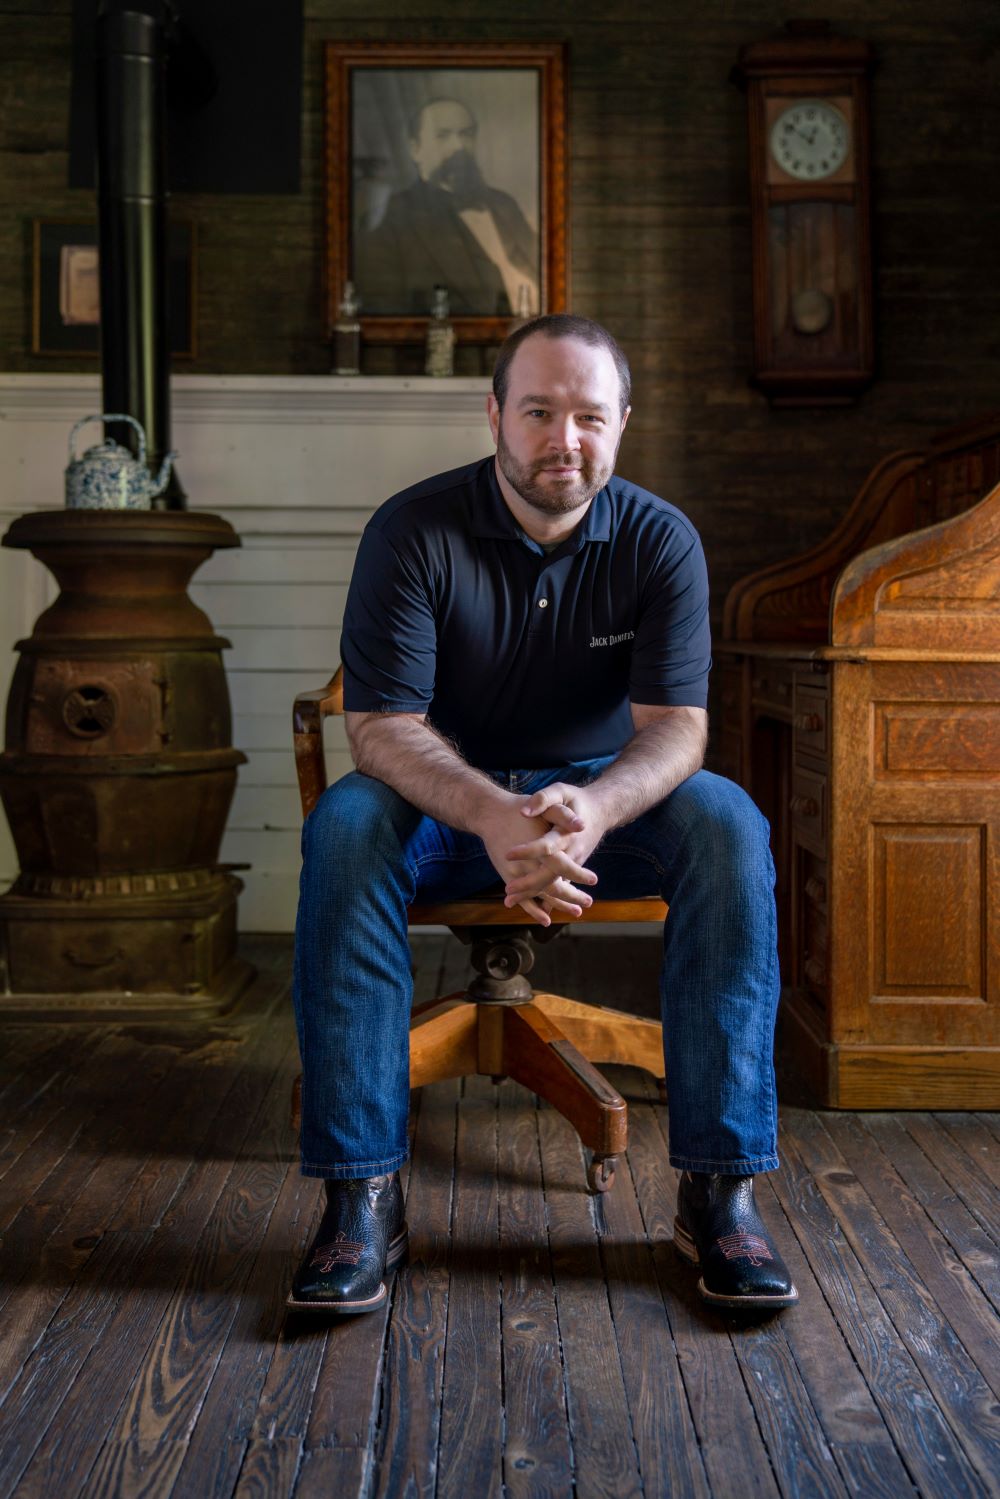 Chris Fletcher sits on a wooden office chair in front of an antique potbelly stove, an antique desk, and a portrait of Jack Daniels.